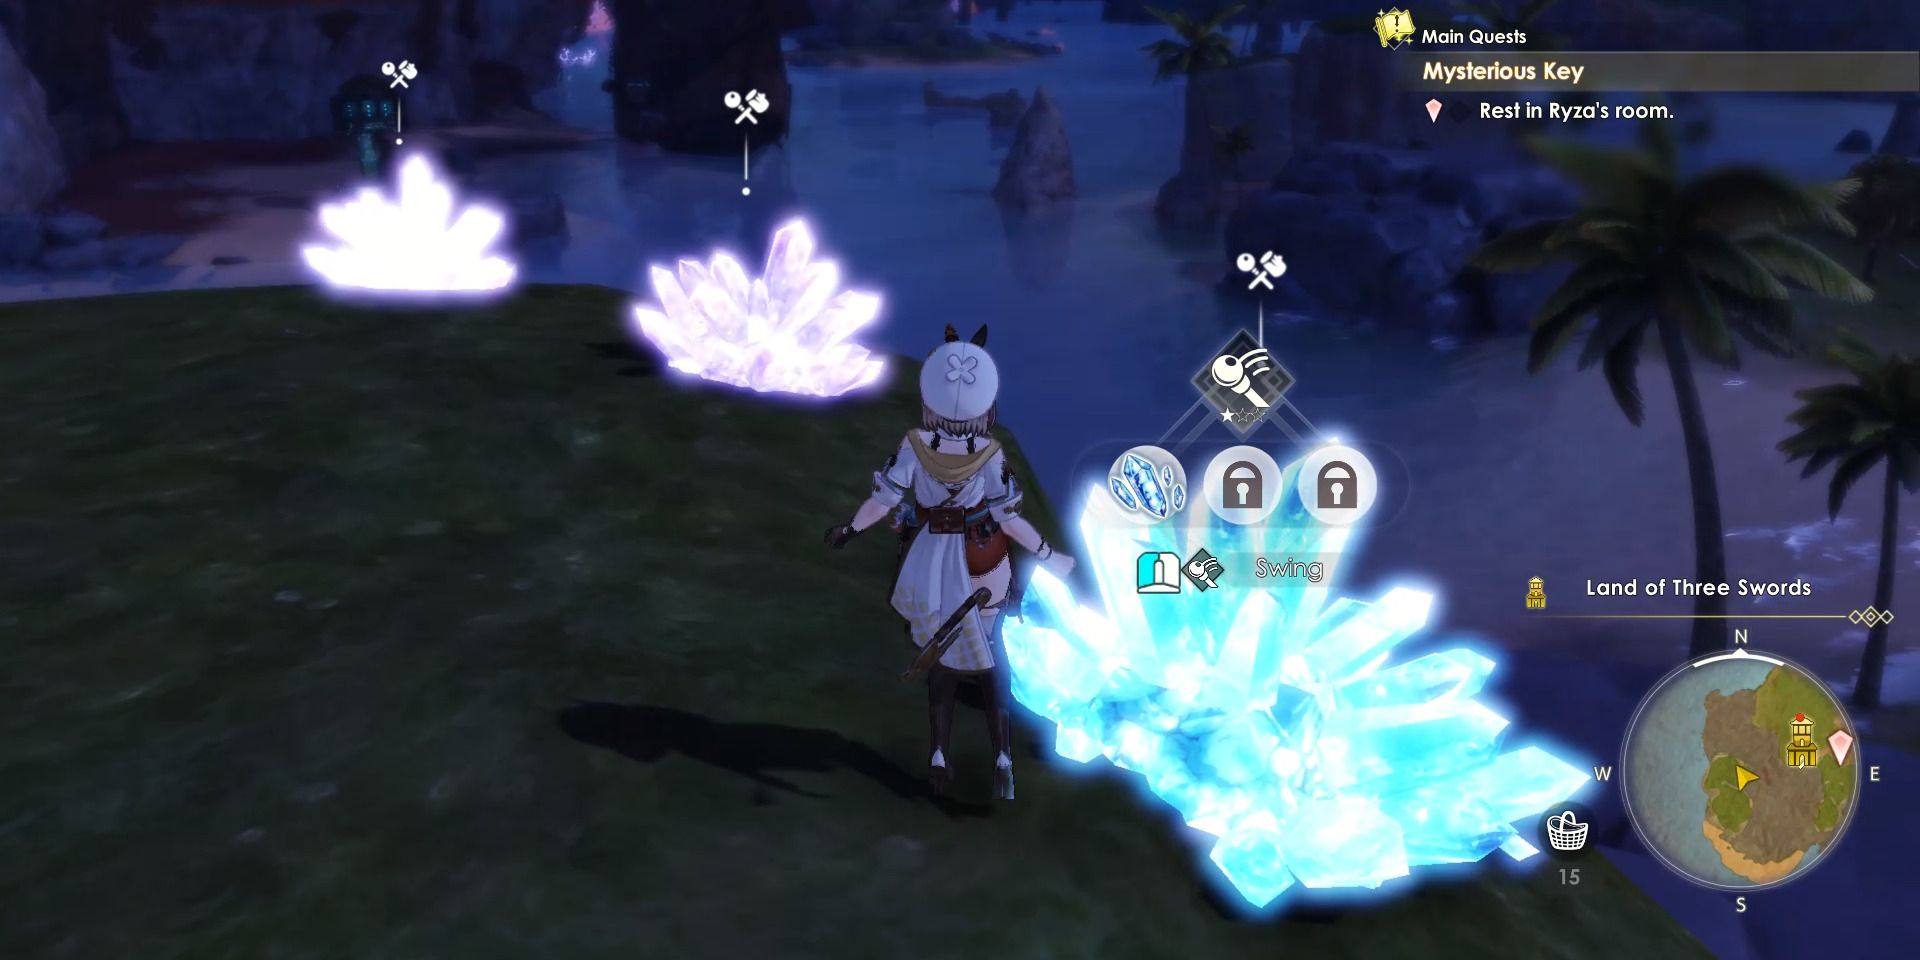 Image of Fairystone shards in Land of Three Swords in Atelier Ryza 3.